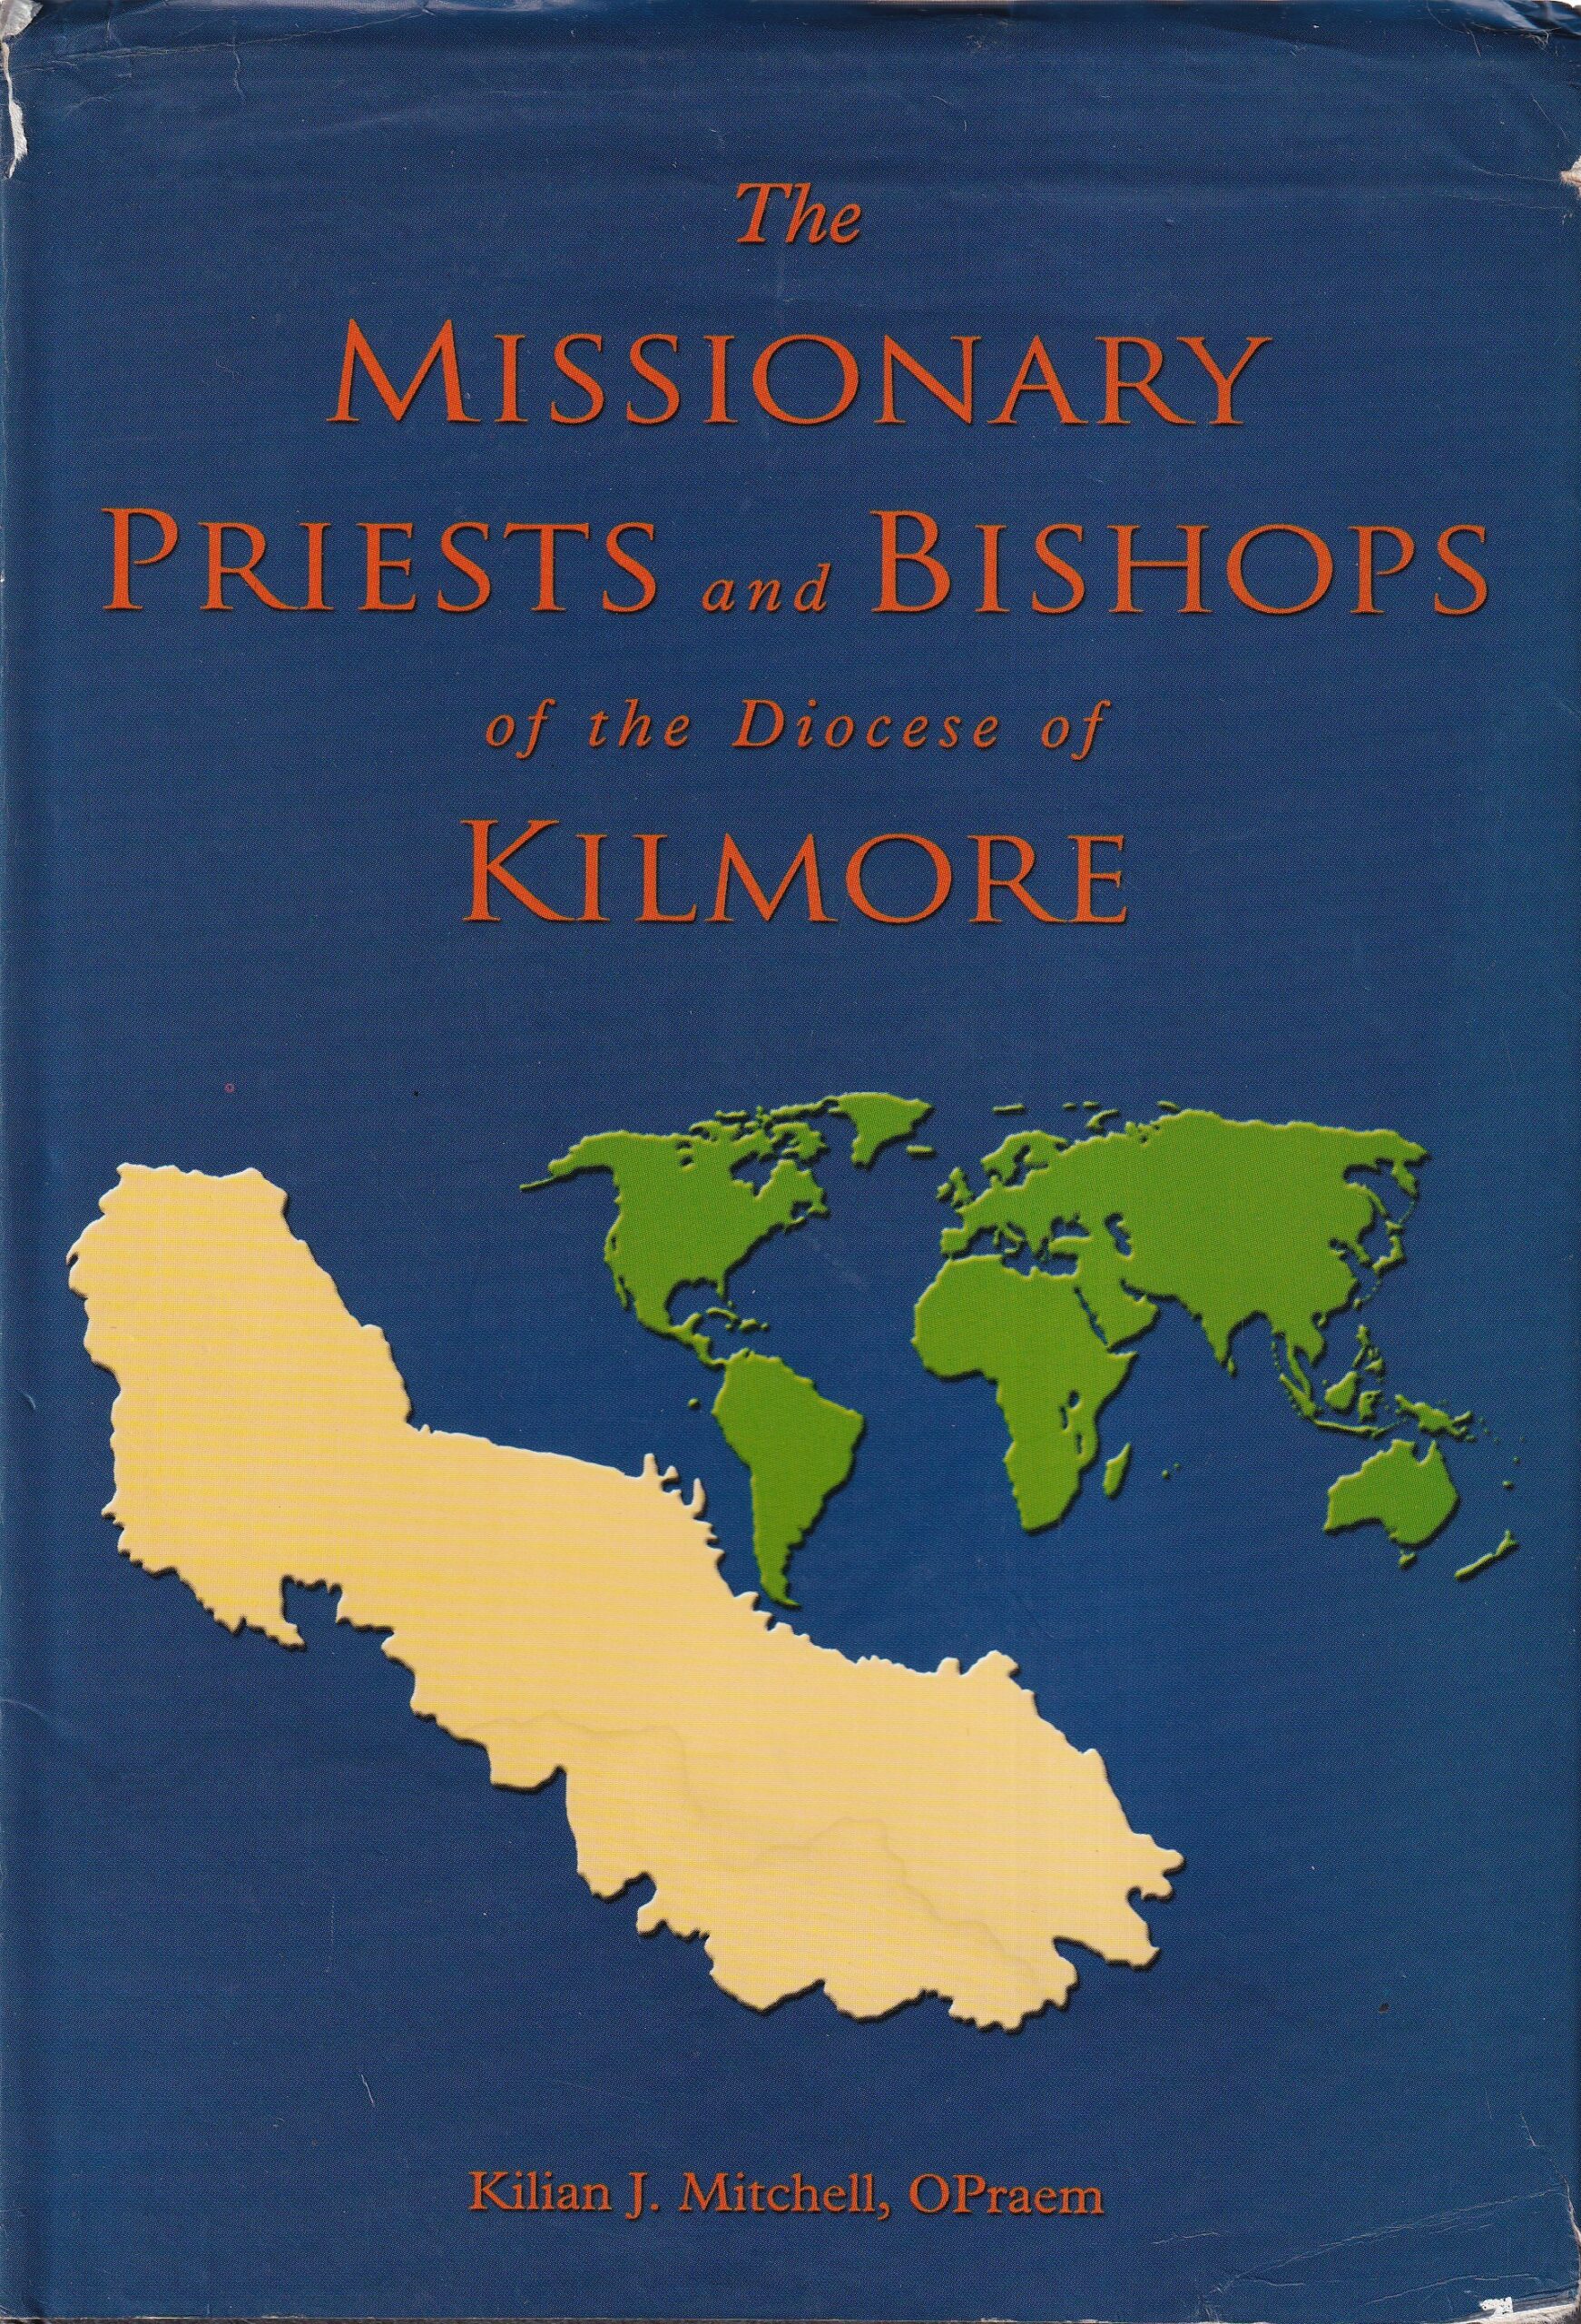 The Missionary Priests and Bishops of the Diocese of Kilmore- Signed | Killian J. Mitchell Opraem | Charlie Byrne's